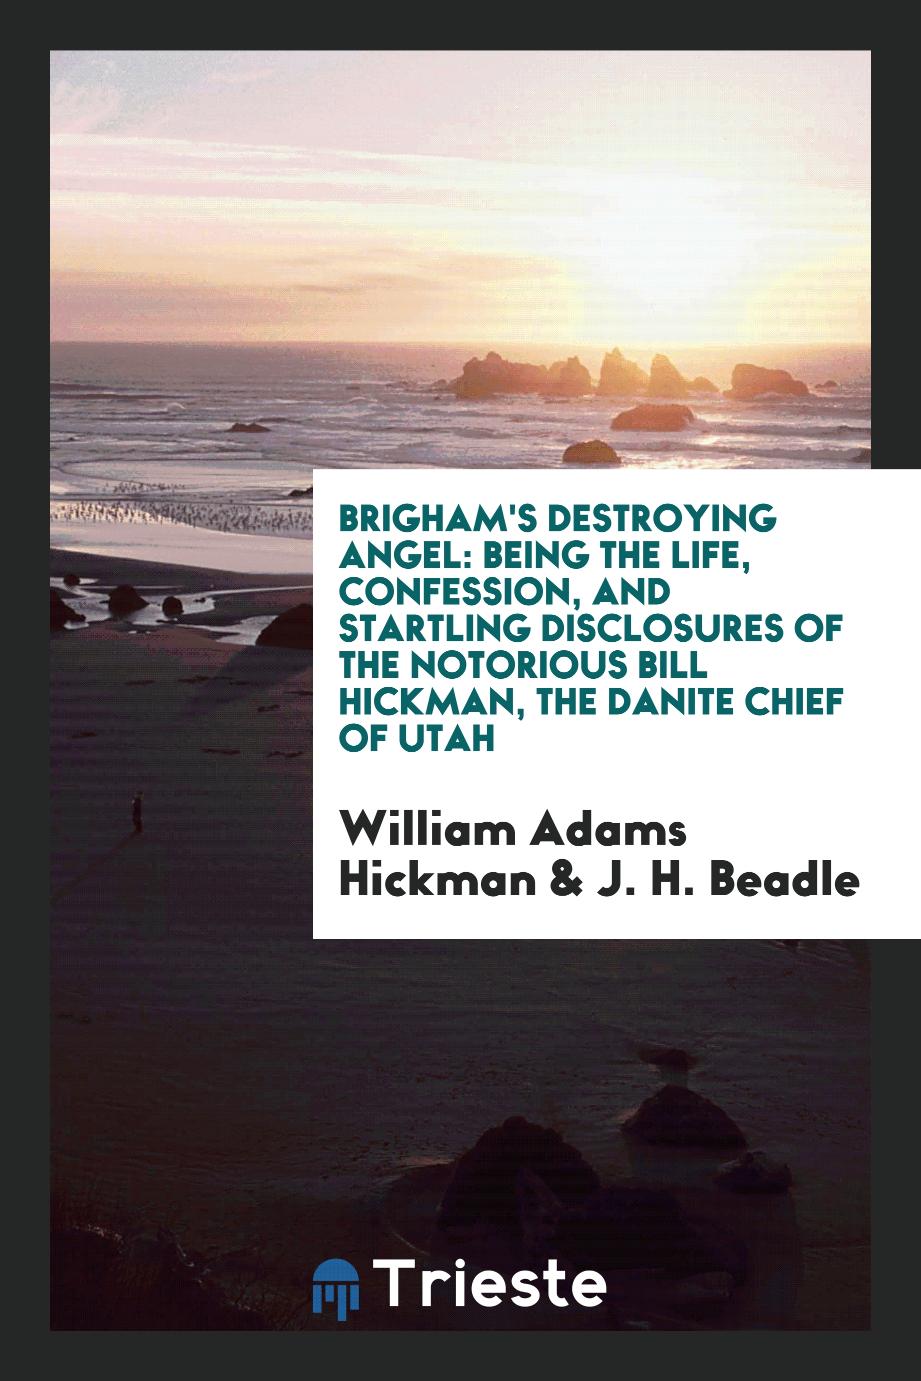 Brigham's destroying angel: being the life, confession, and startling disclosures of the notorious Bill Hickman, the Danite chief of Utah